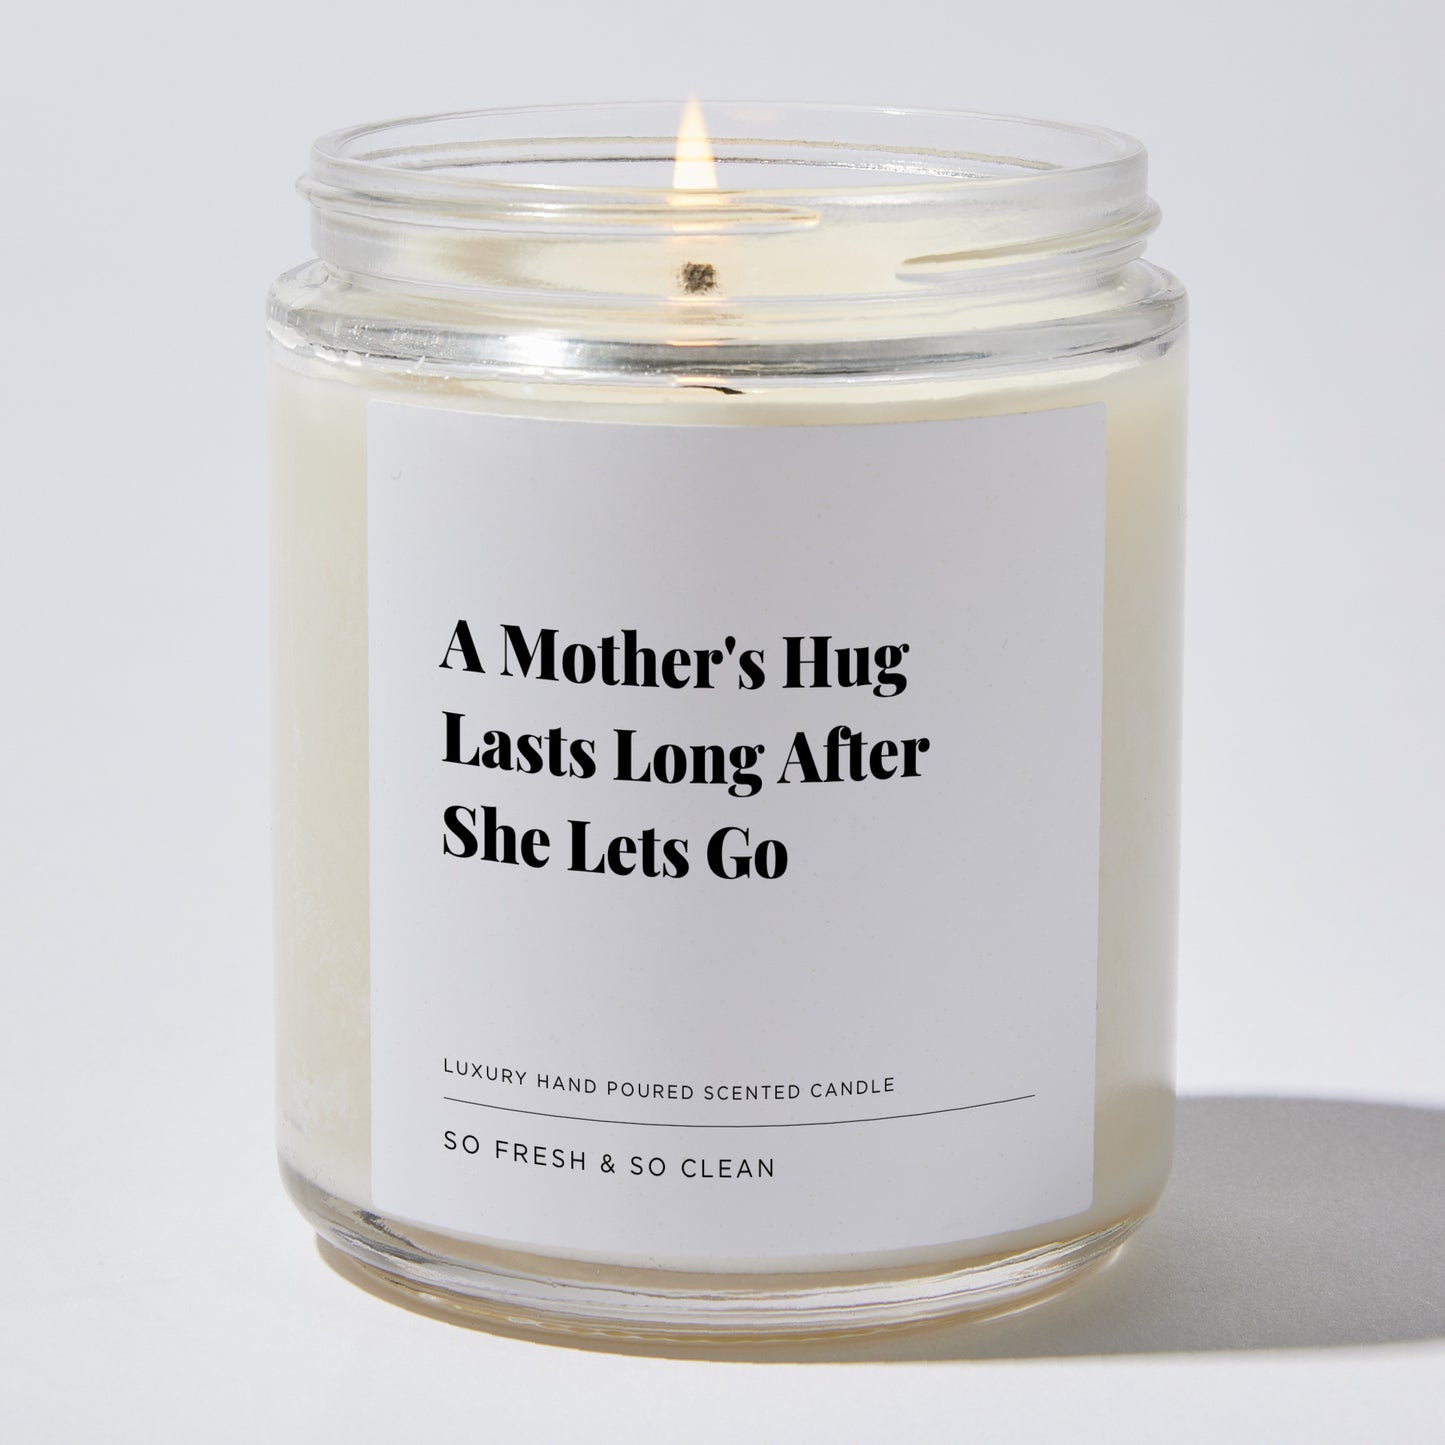 Gift for Mom - A mother's hug lasts long after she lets go - Candle